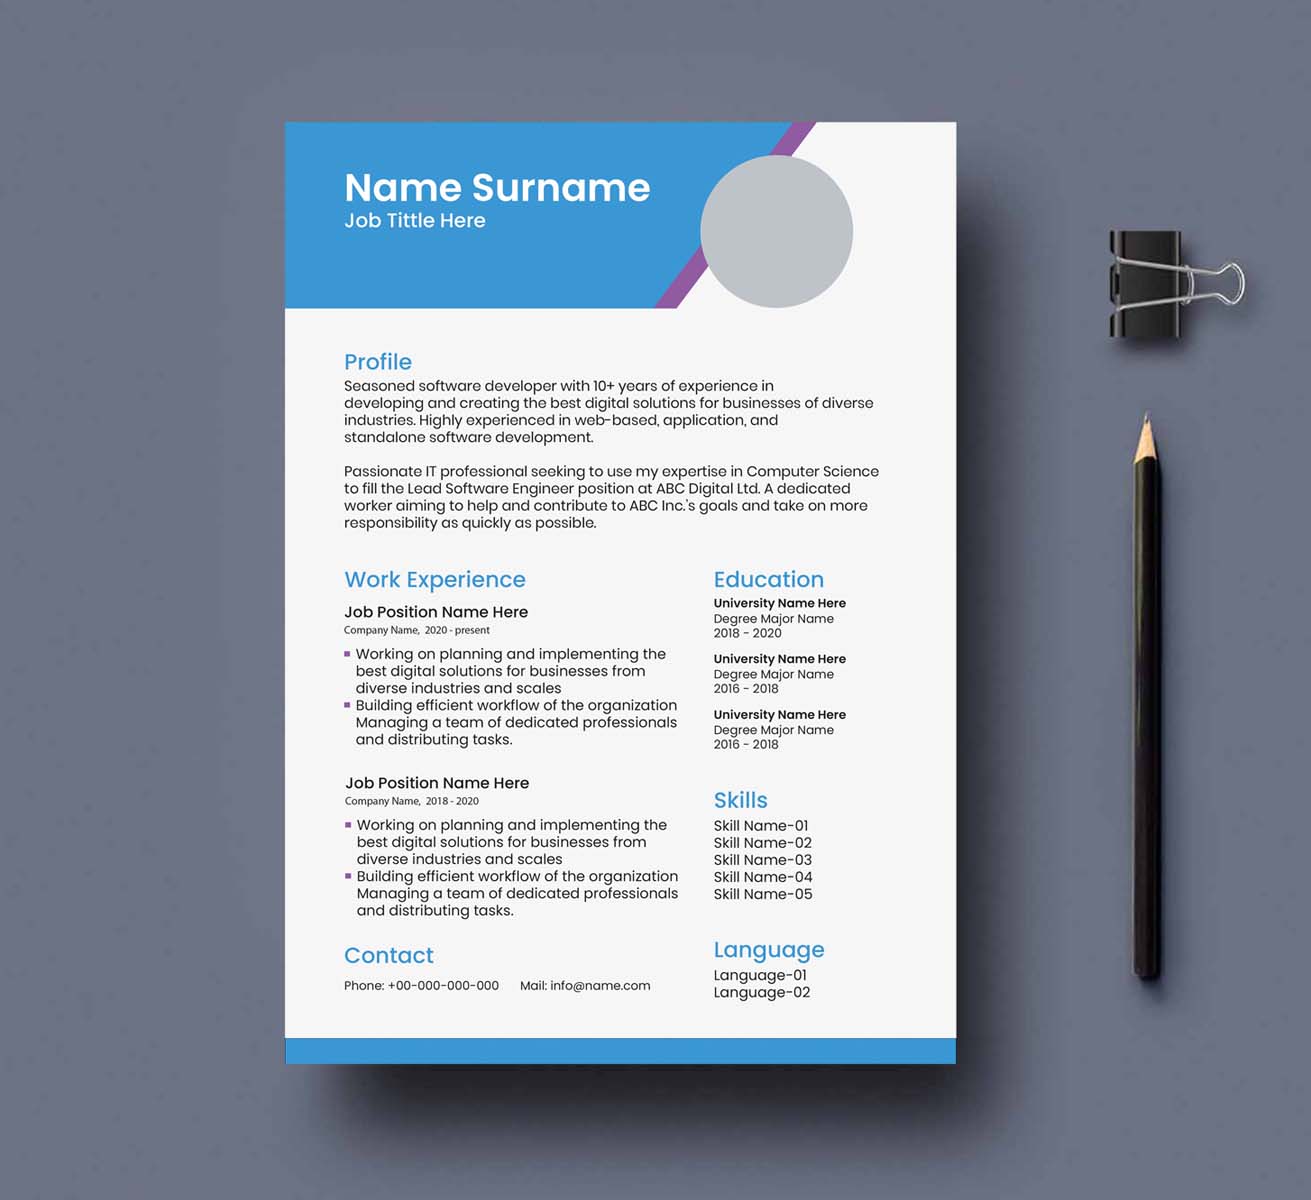 Blue and white resume with a pencil.